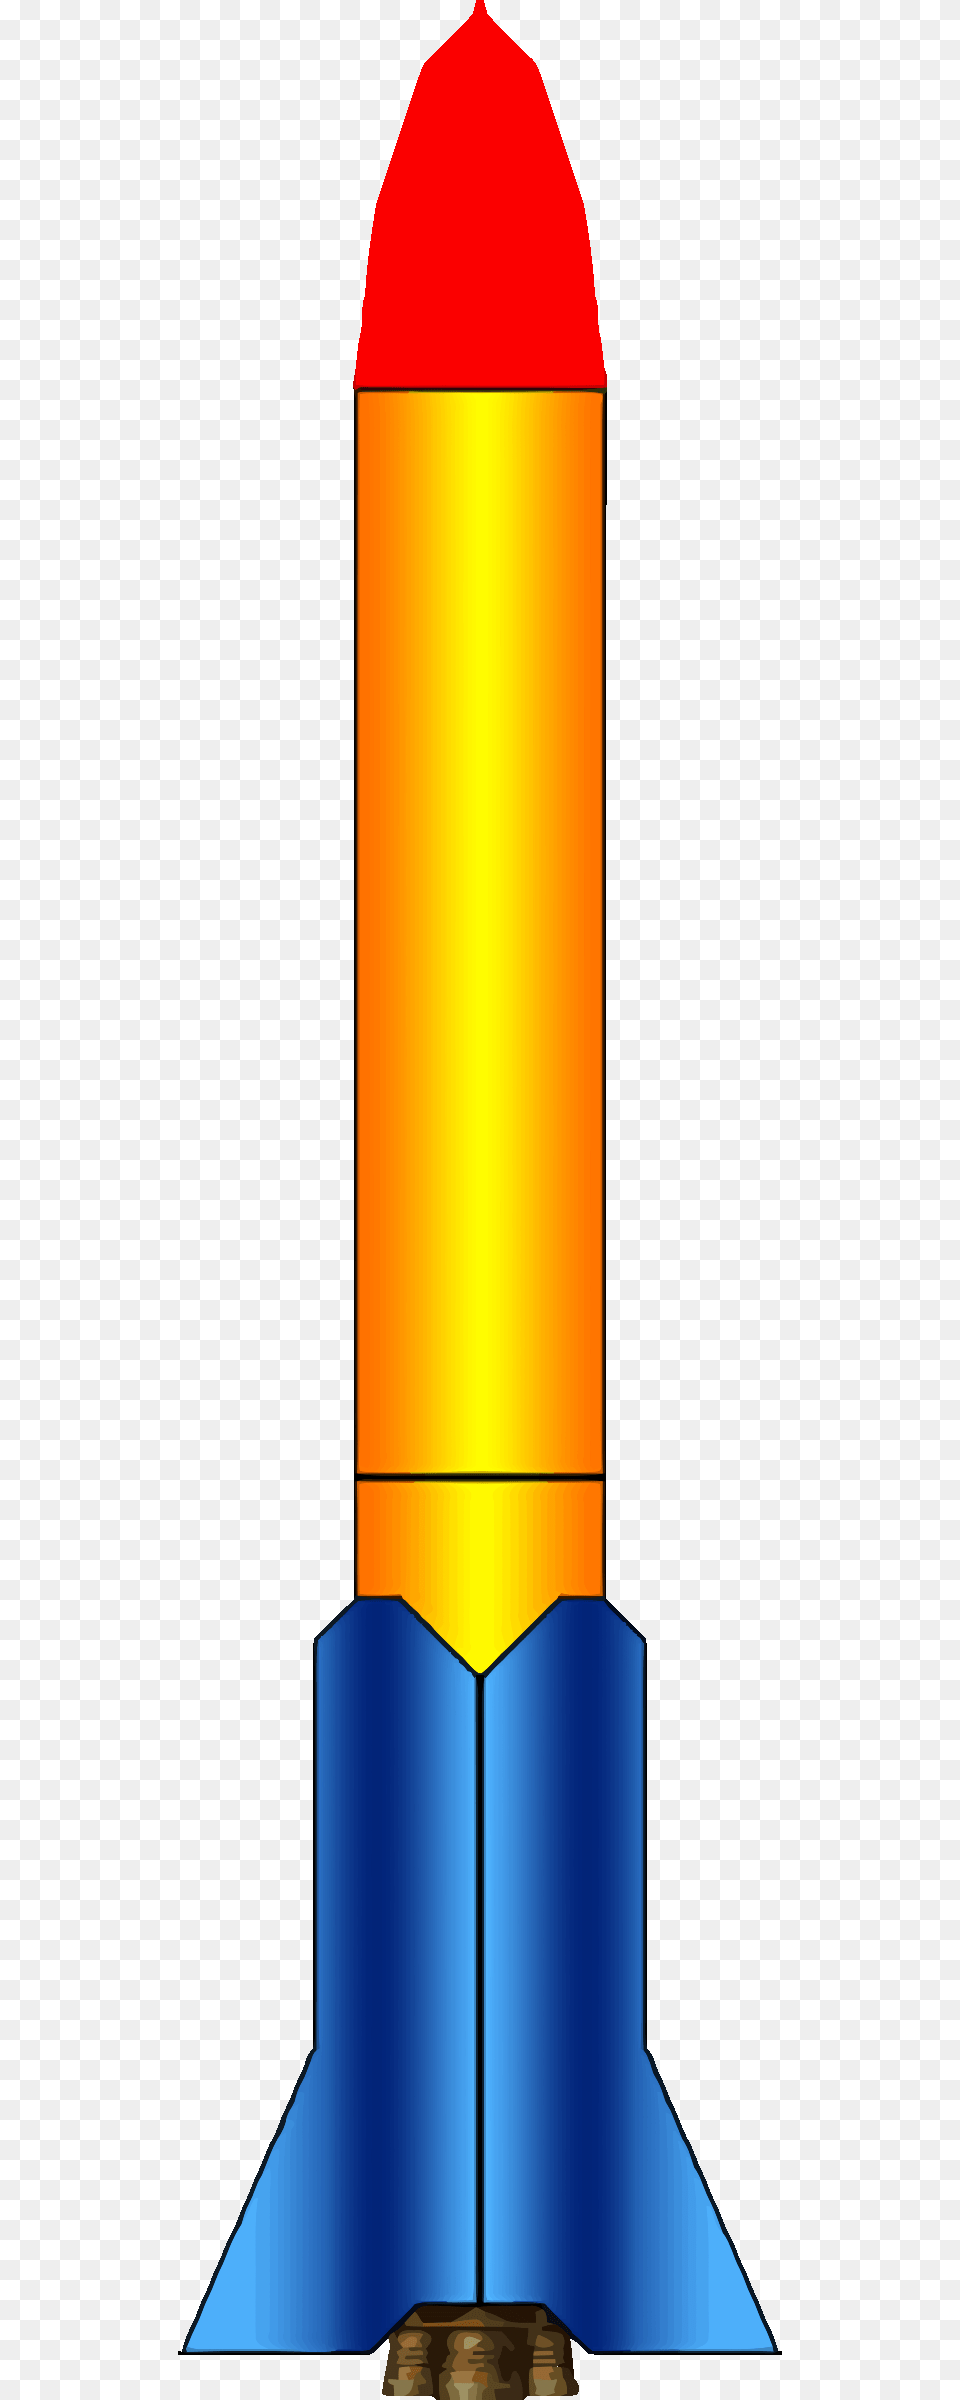 Multi Colored Rocket Vector, Ammunition, Missile, Weapon, Cosmetics Free Transparent Png